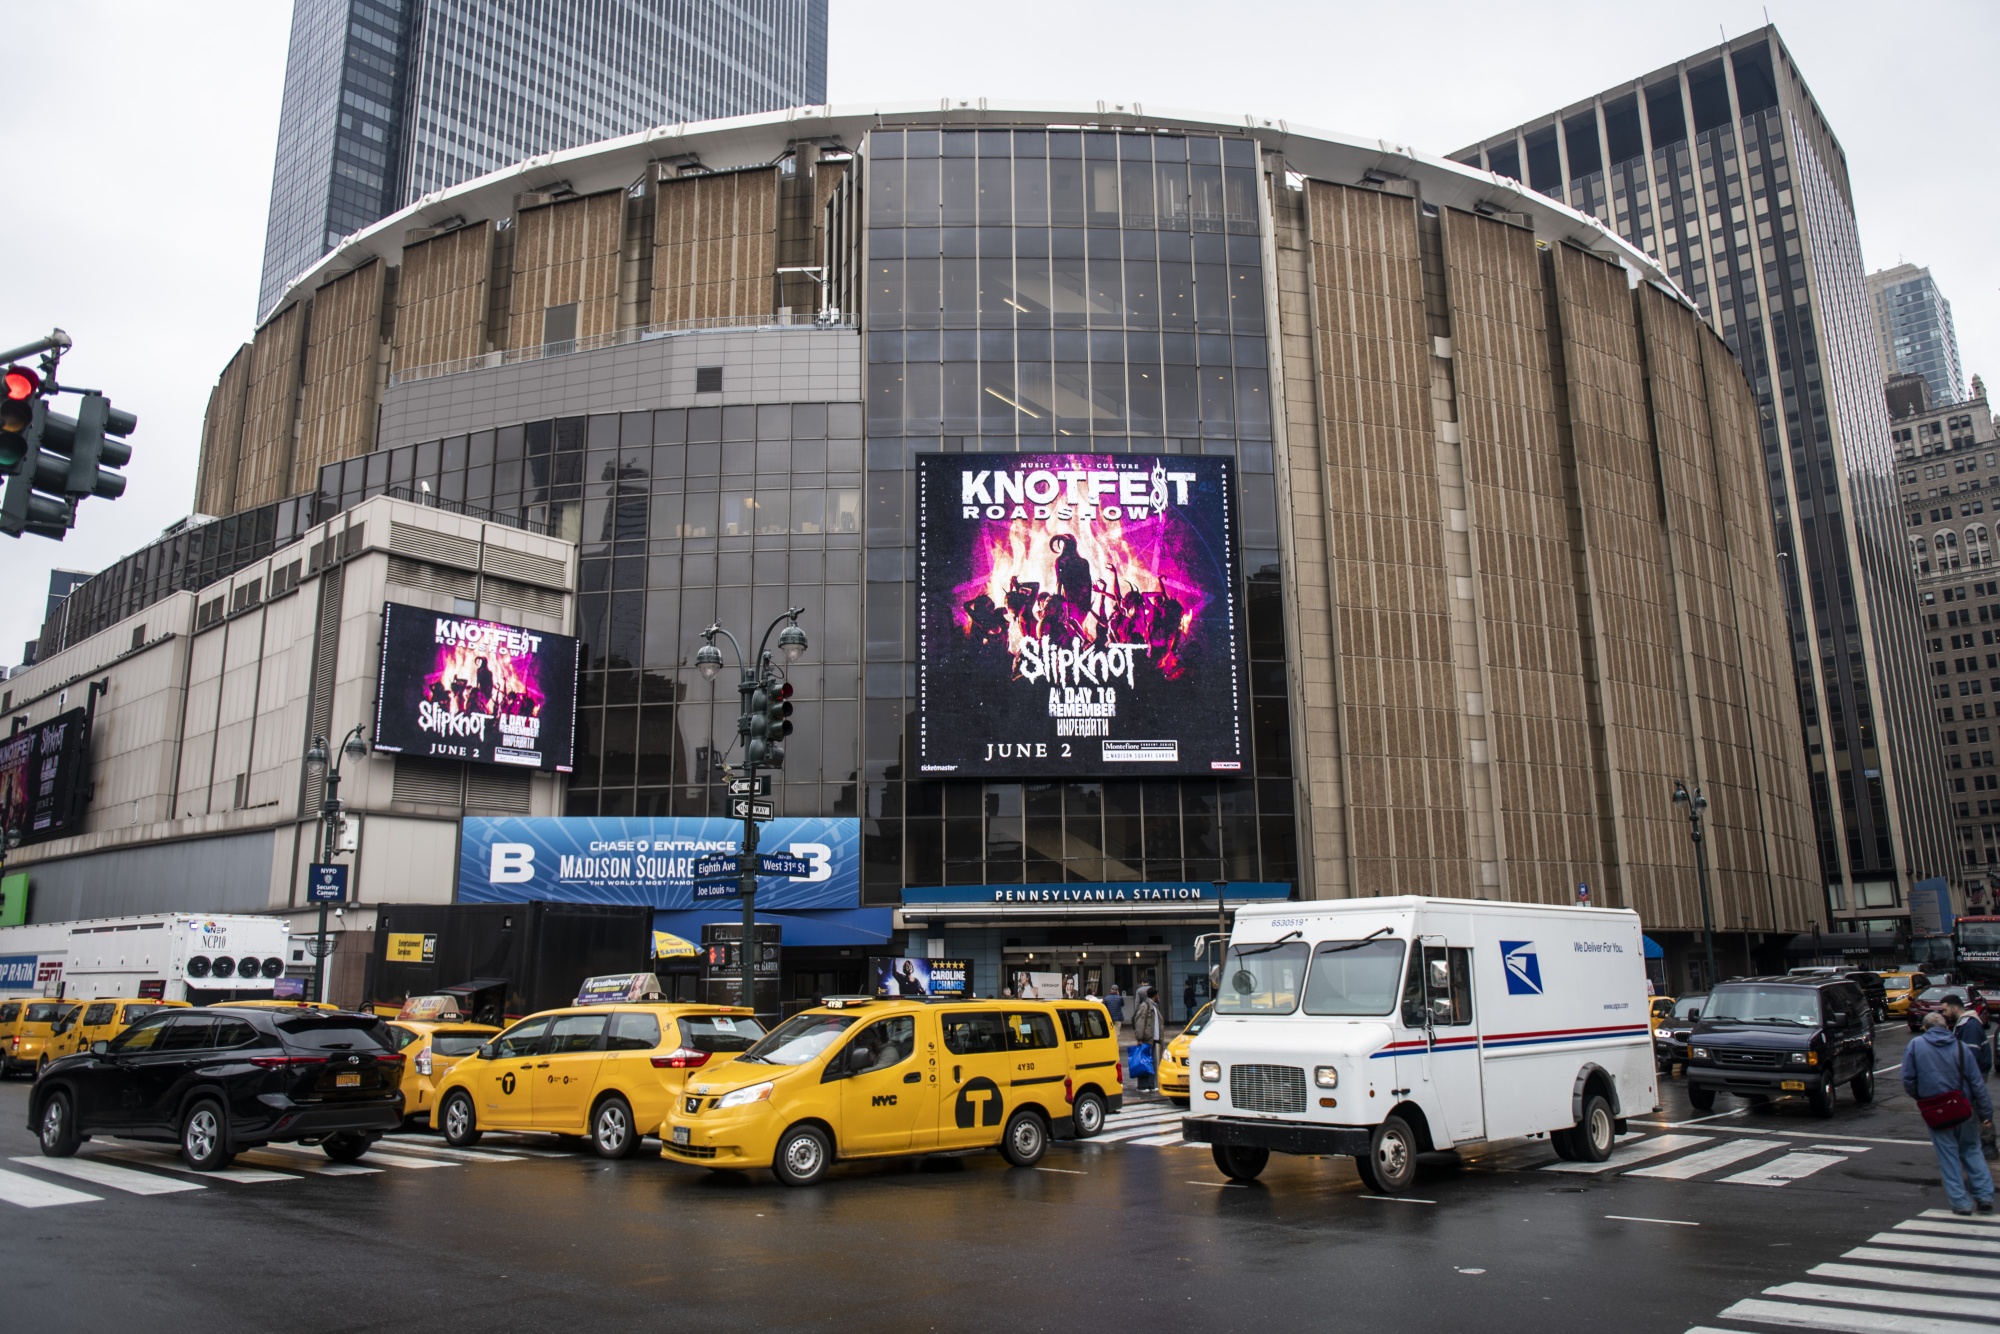 New York Planning Commission Votes To Keep Madison Square Garden in Place